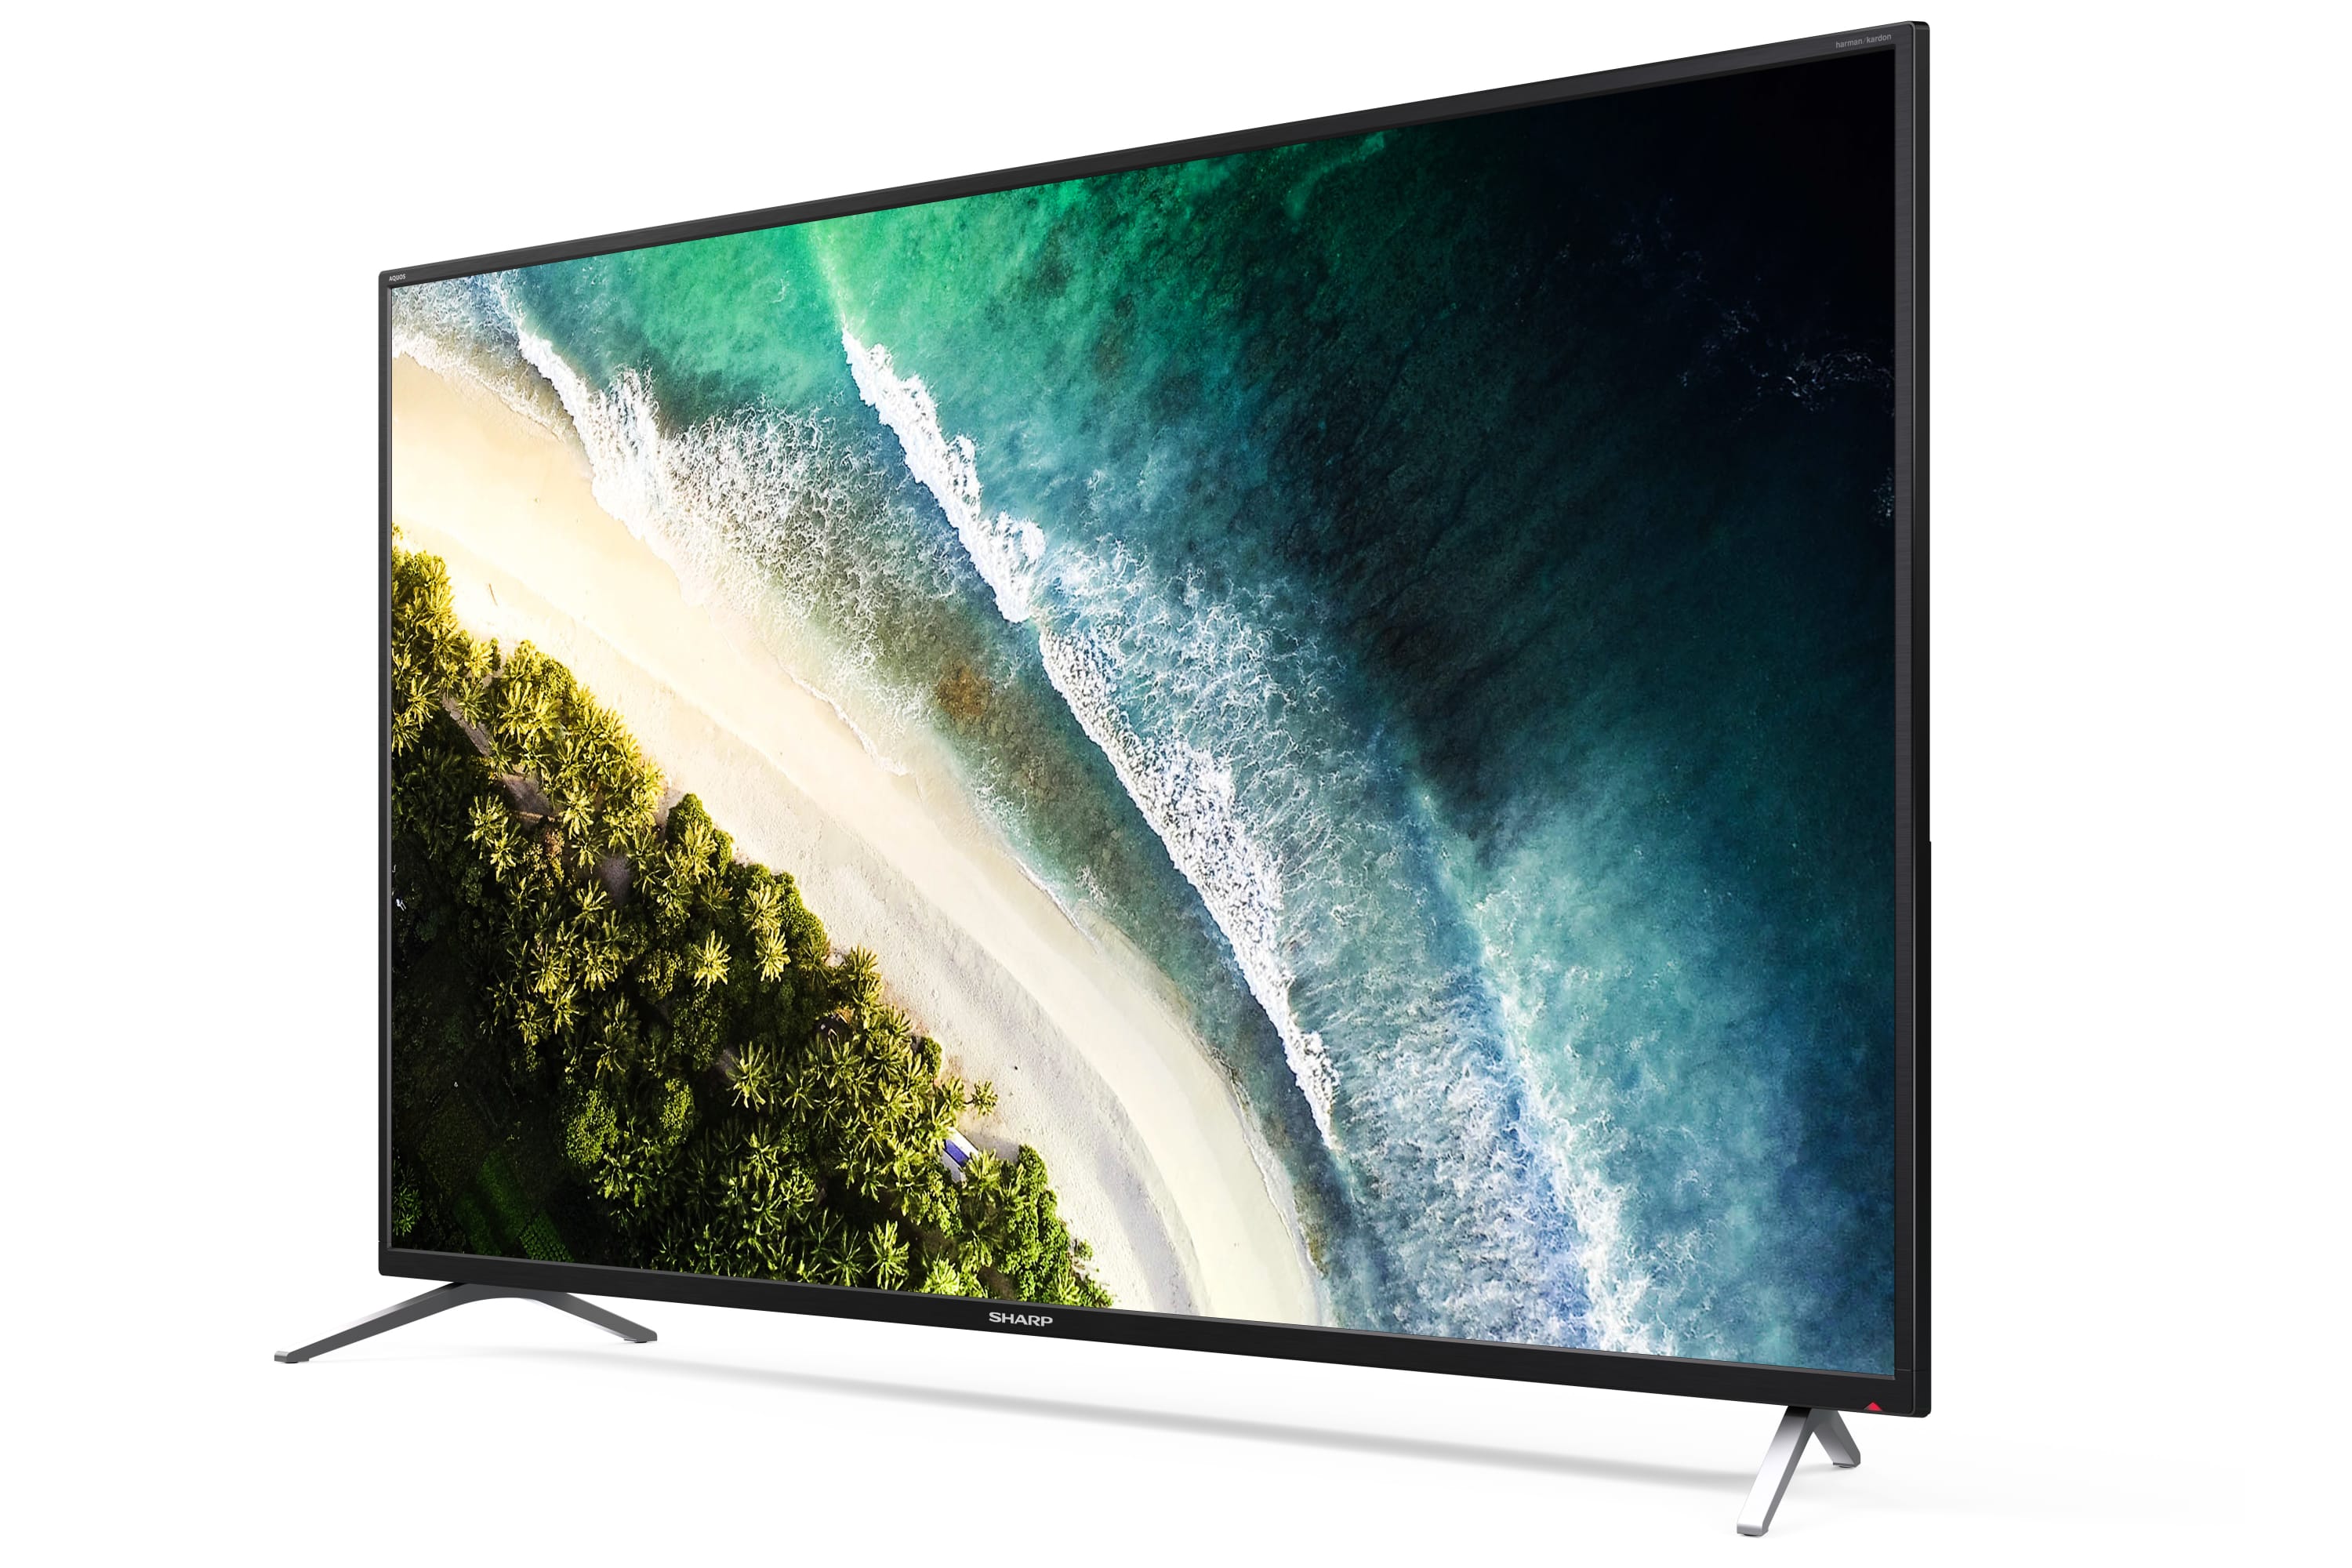 Android TV 4K UHD - 55" 4K ULTRA HD ANDROID TV™